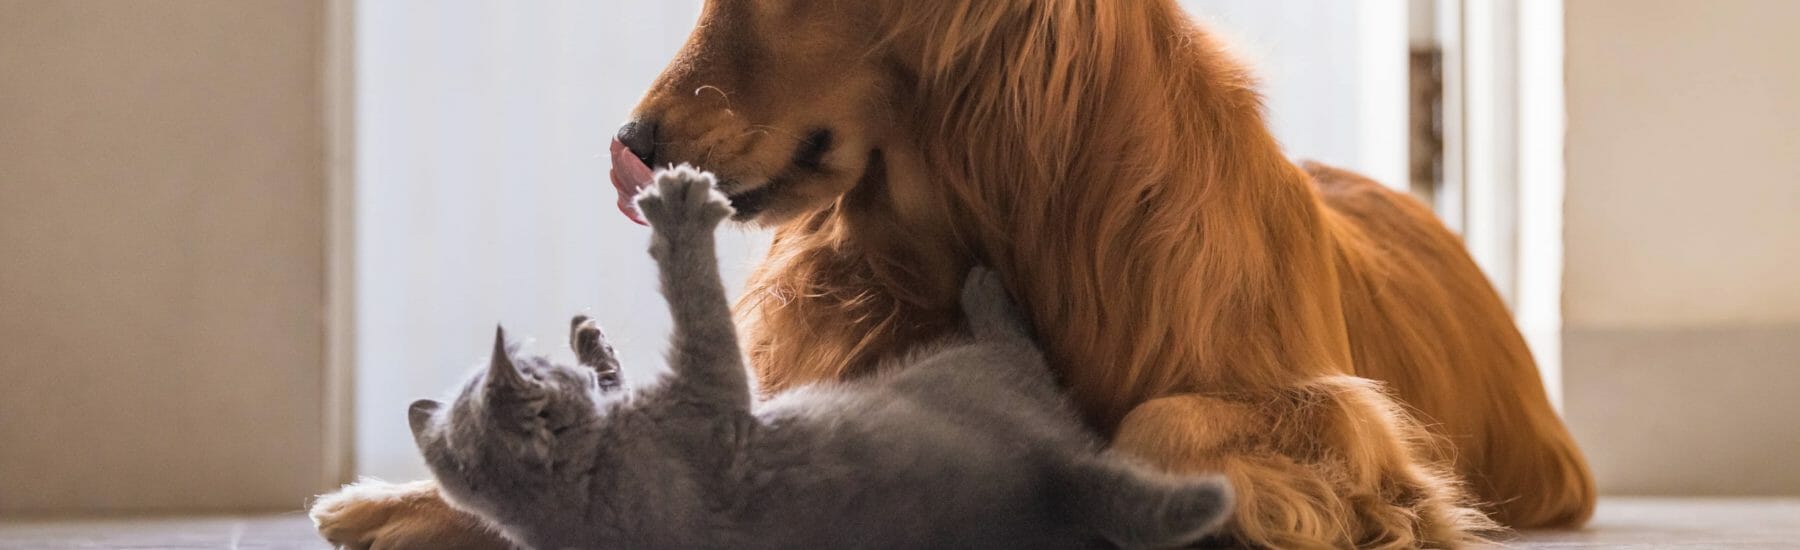 Large golden retriever playing with smaller grey cat